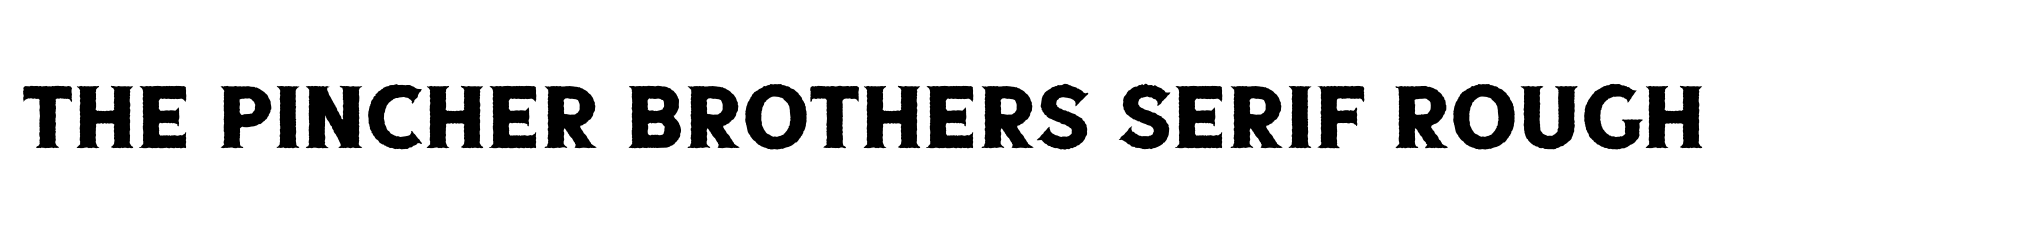 The Pincher Brothers Serif Rough image